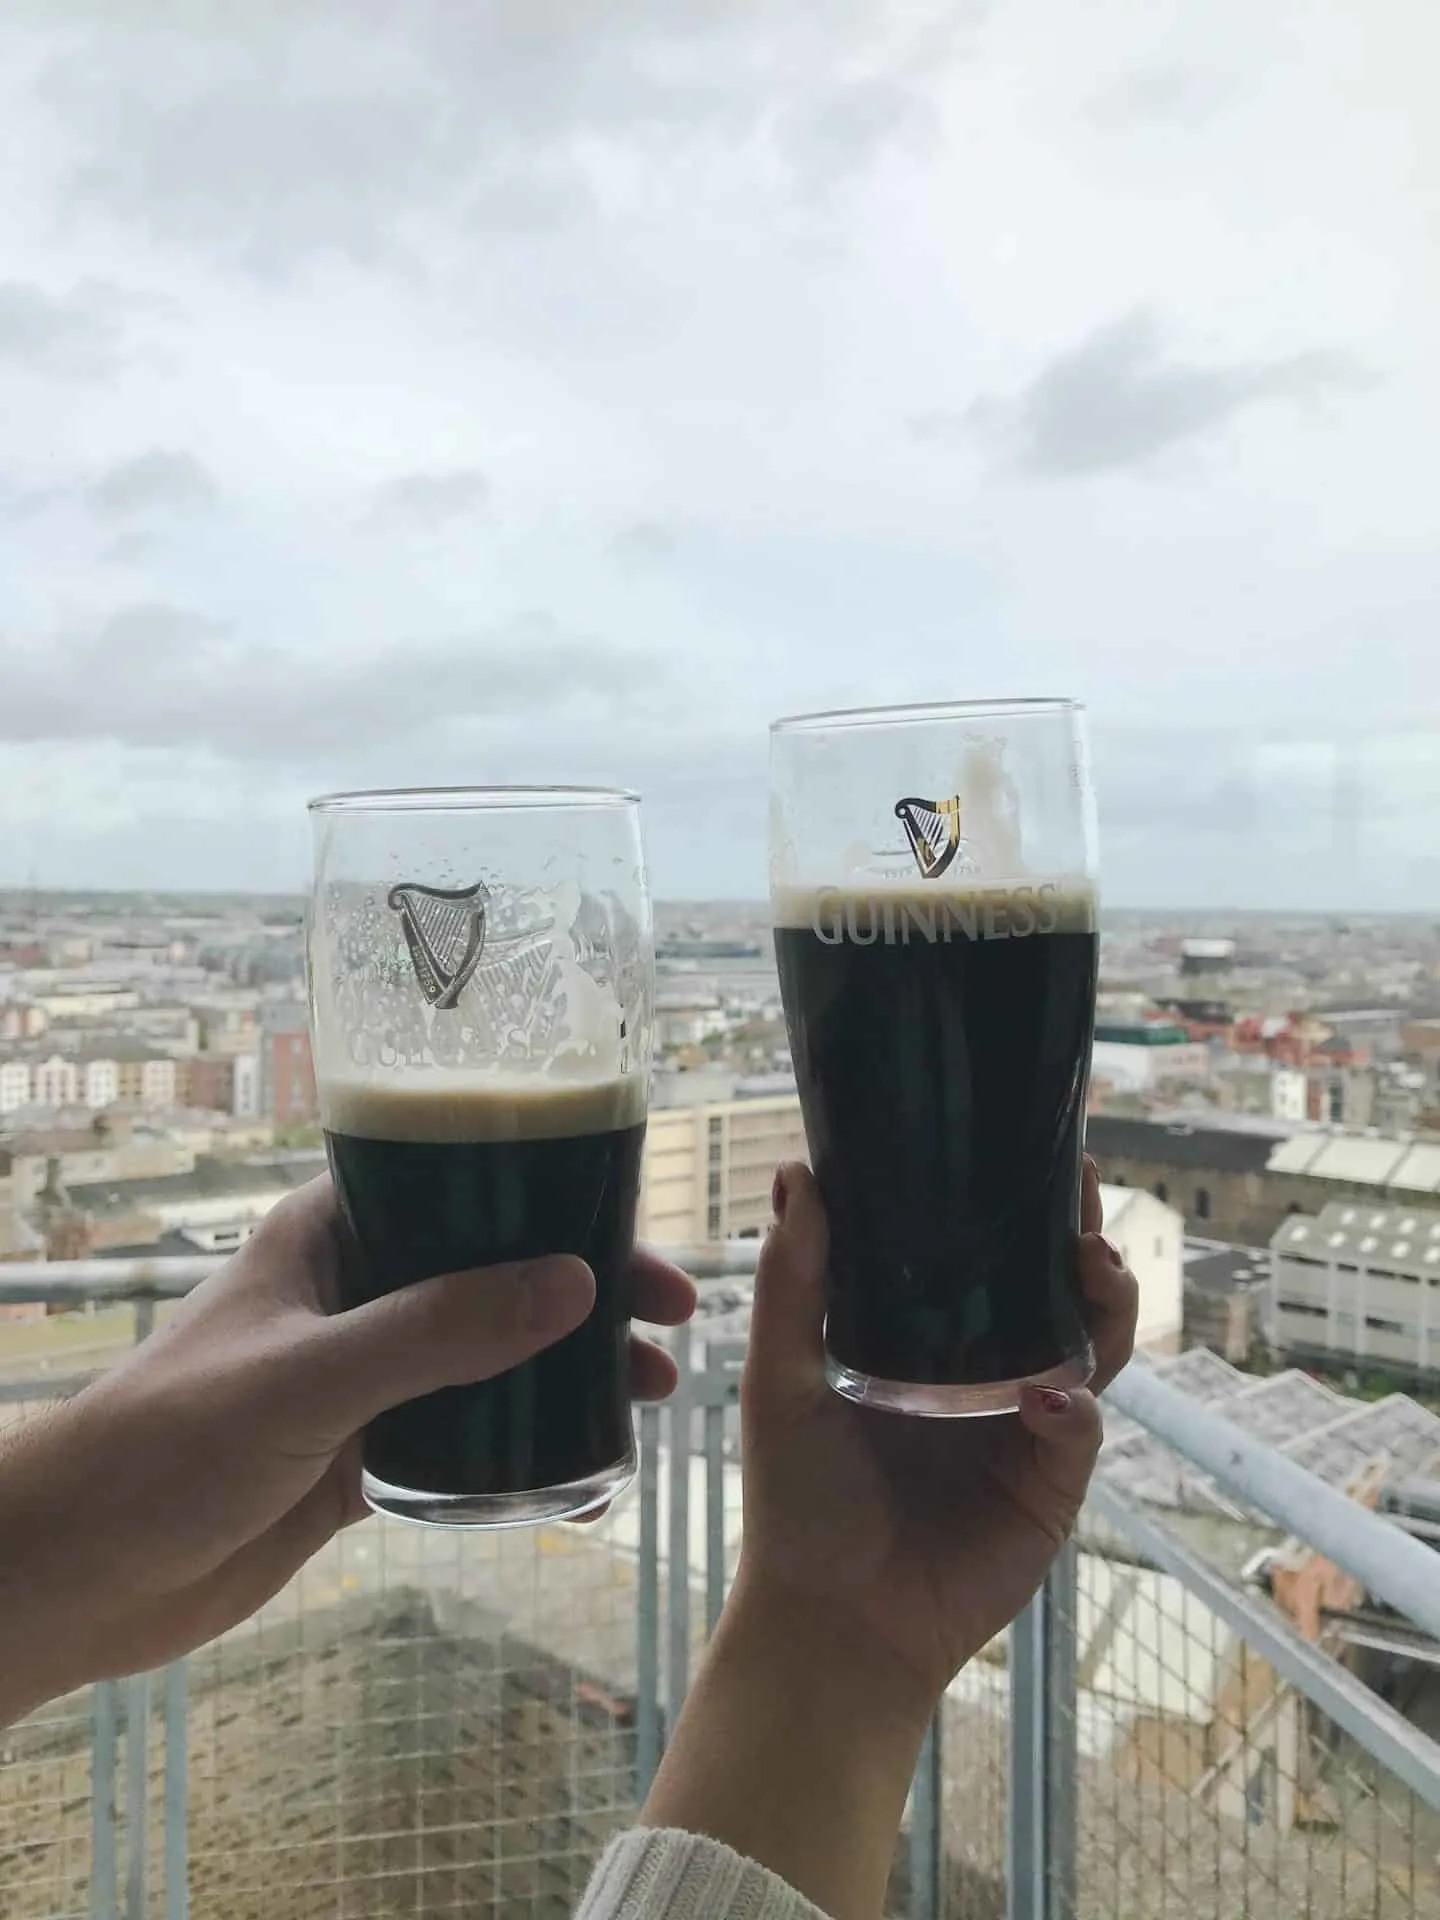 The Guinness Storehouse is one of the best stops along your Ireland road trip itinerary